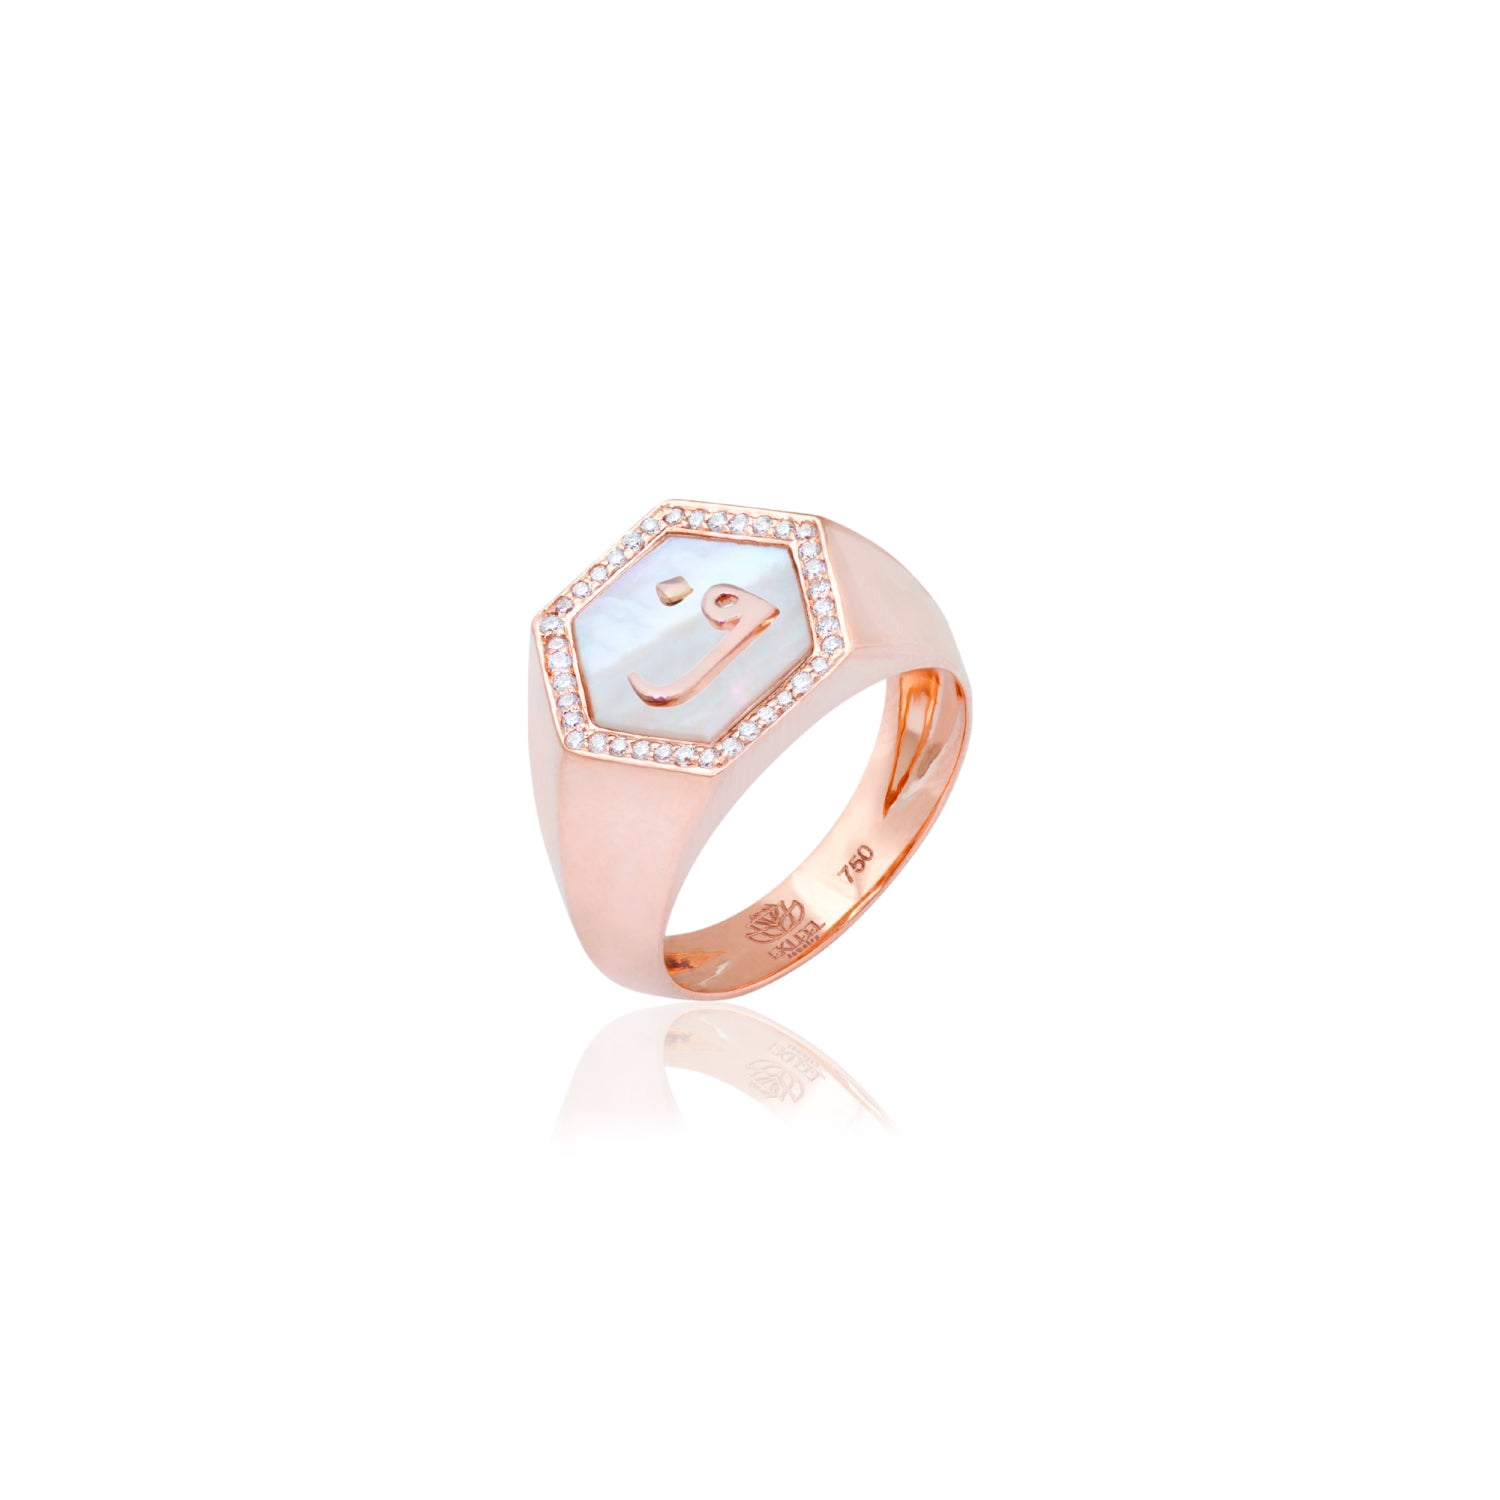 Qamoos 2.0 Letter ف White Mother of Pearl and Diamond Signet Ring in Rose Gold